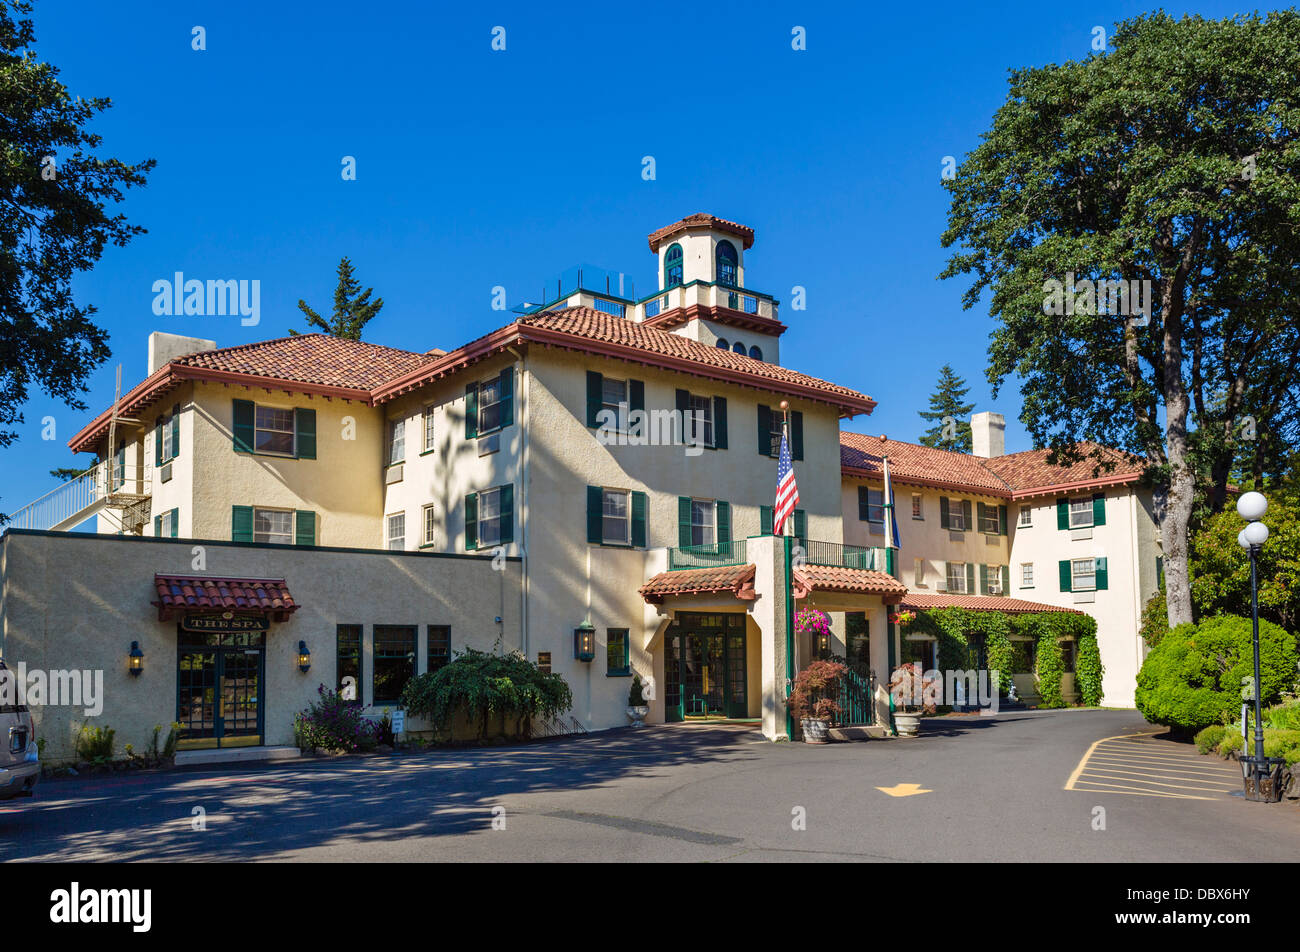 The historic Columbia Gorge Hotel in the town of Hood River, Columbia River Gorge, Oregon, USA Stock Photo